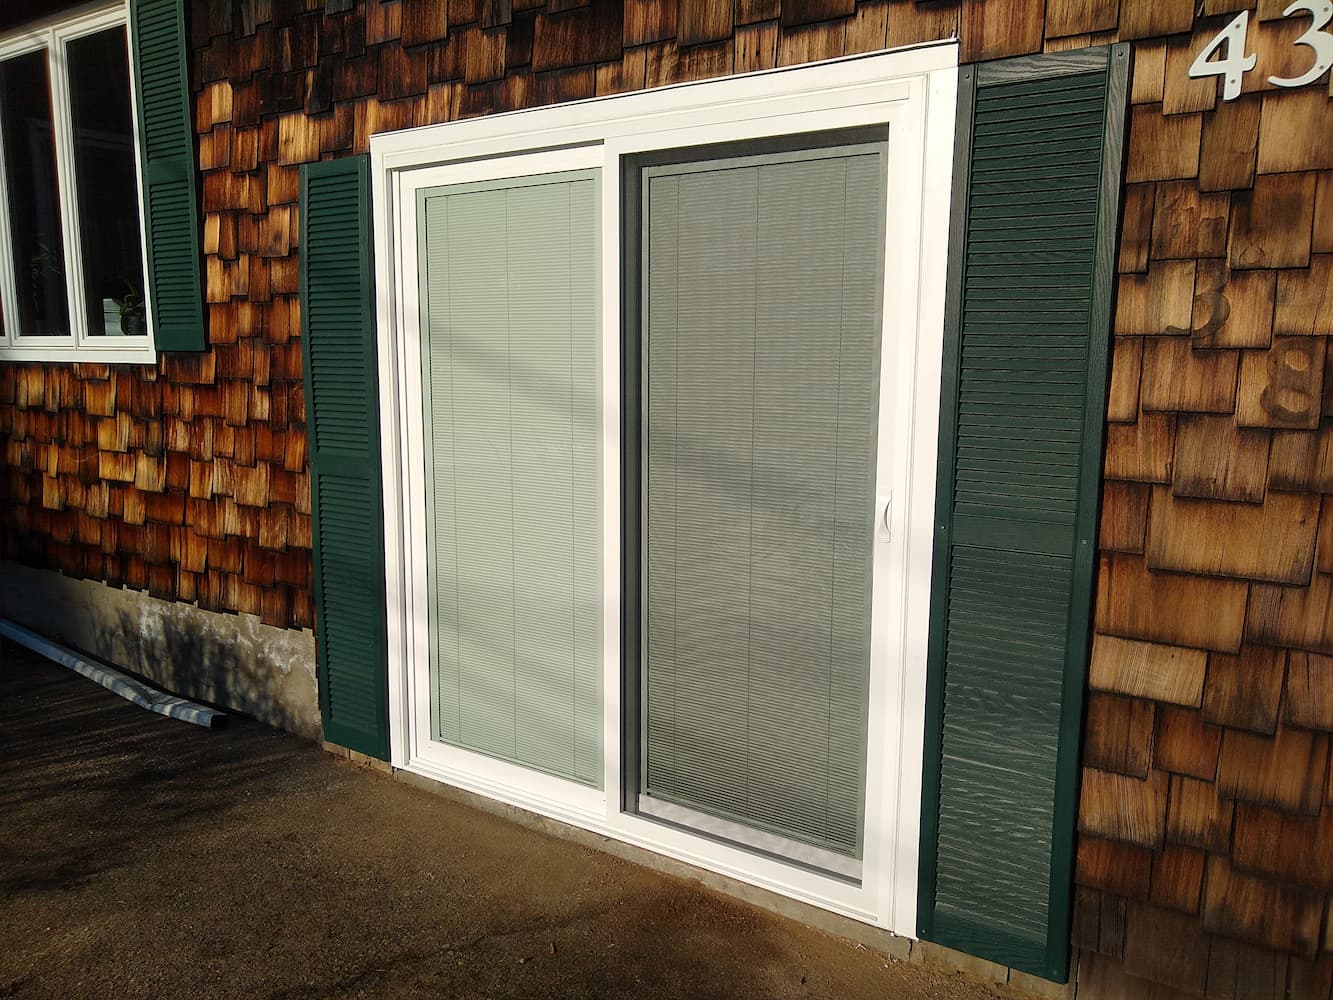 After exterior photo of newly installed Pella sliding patio door